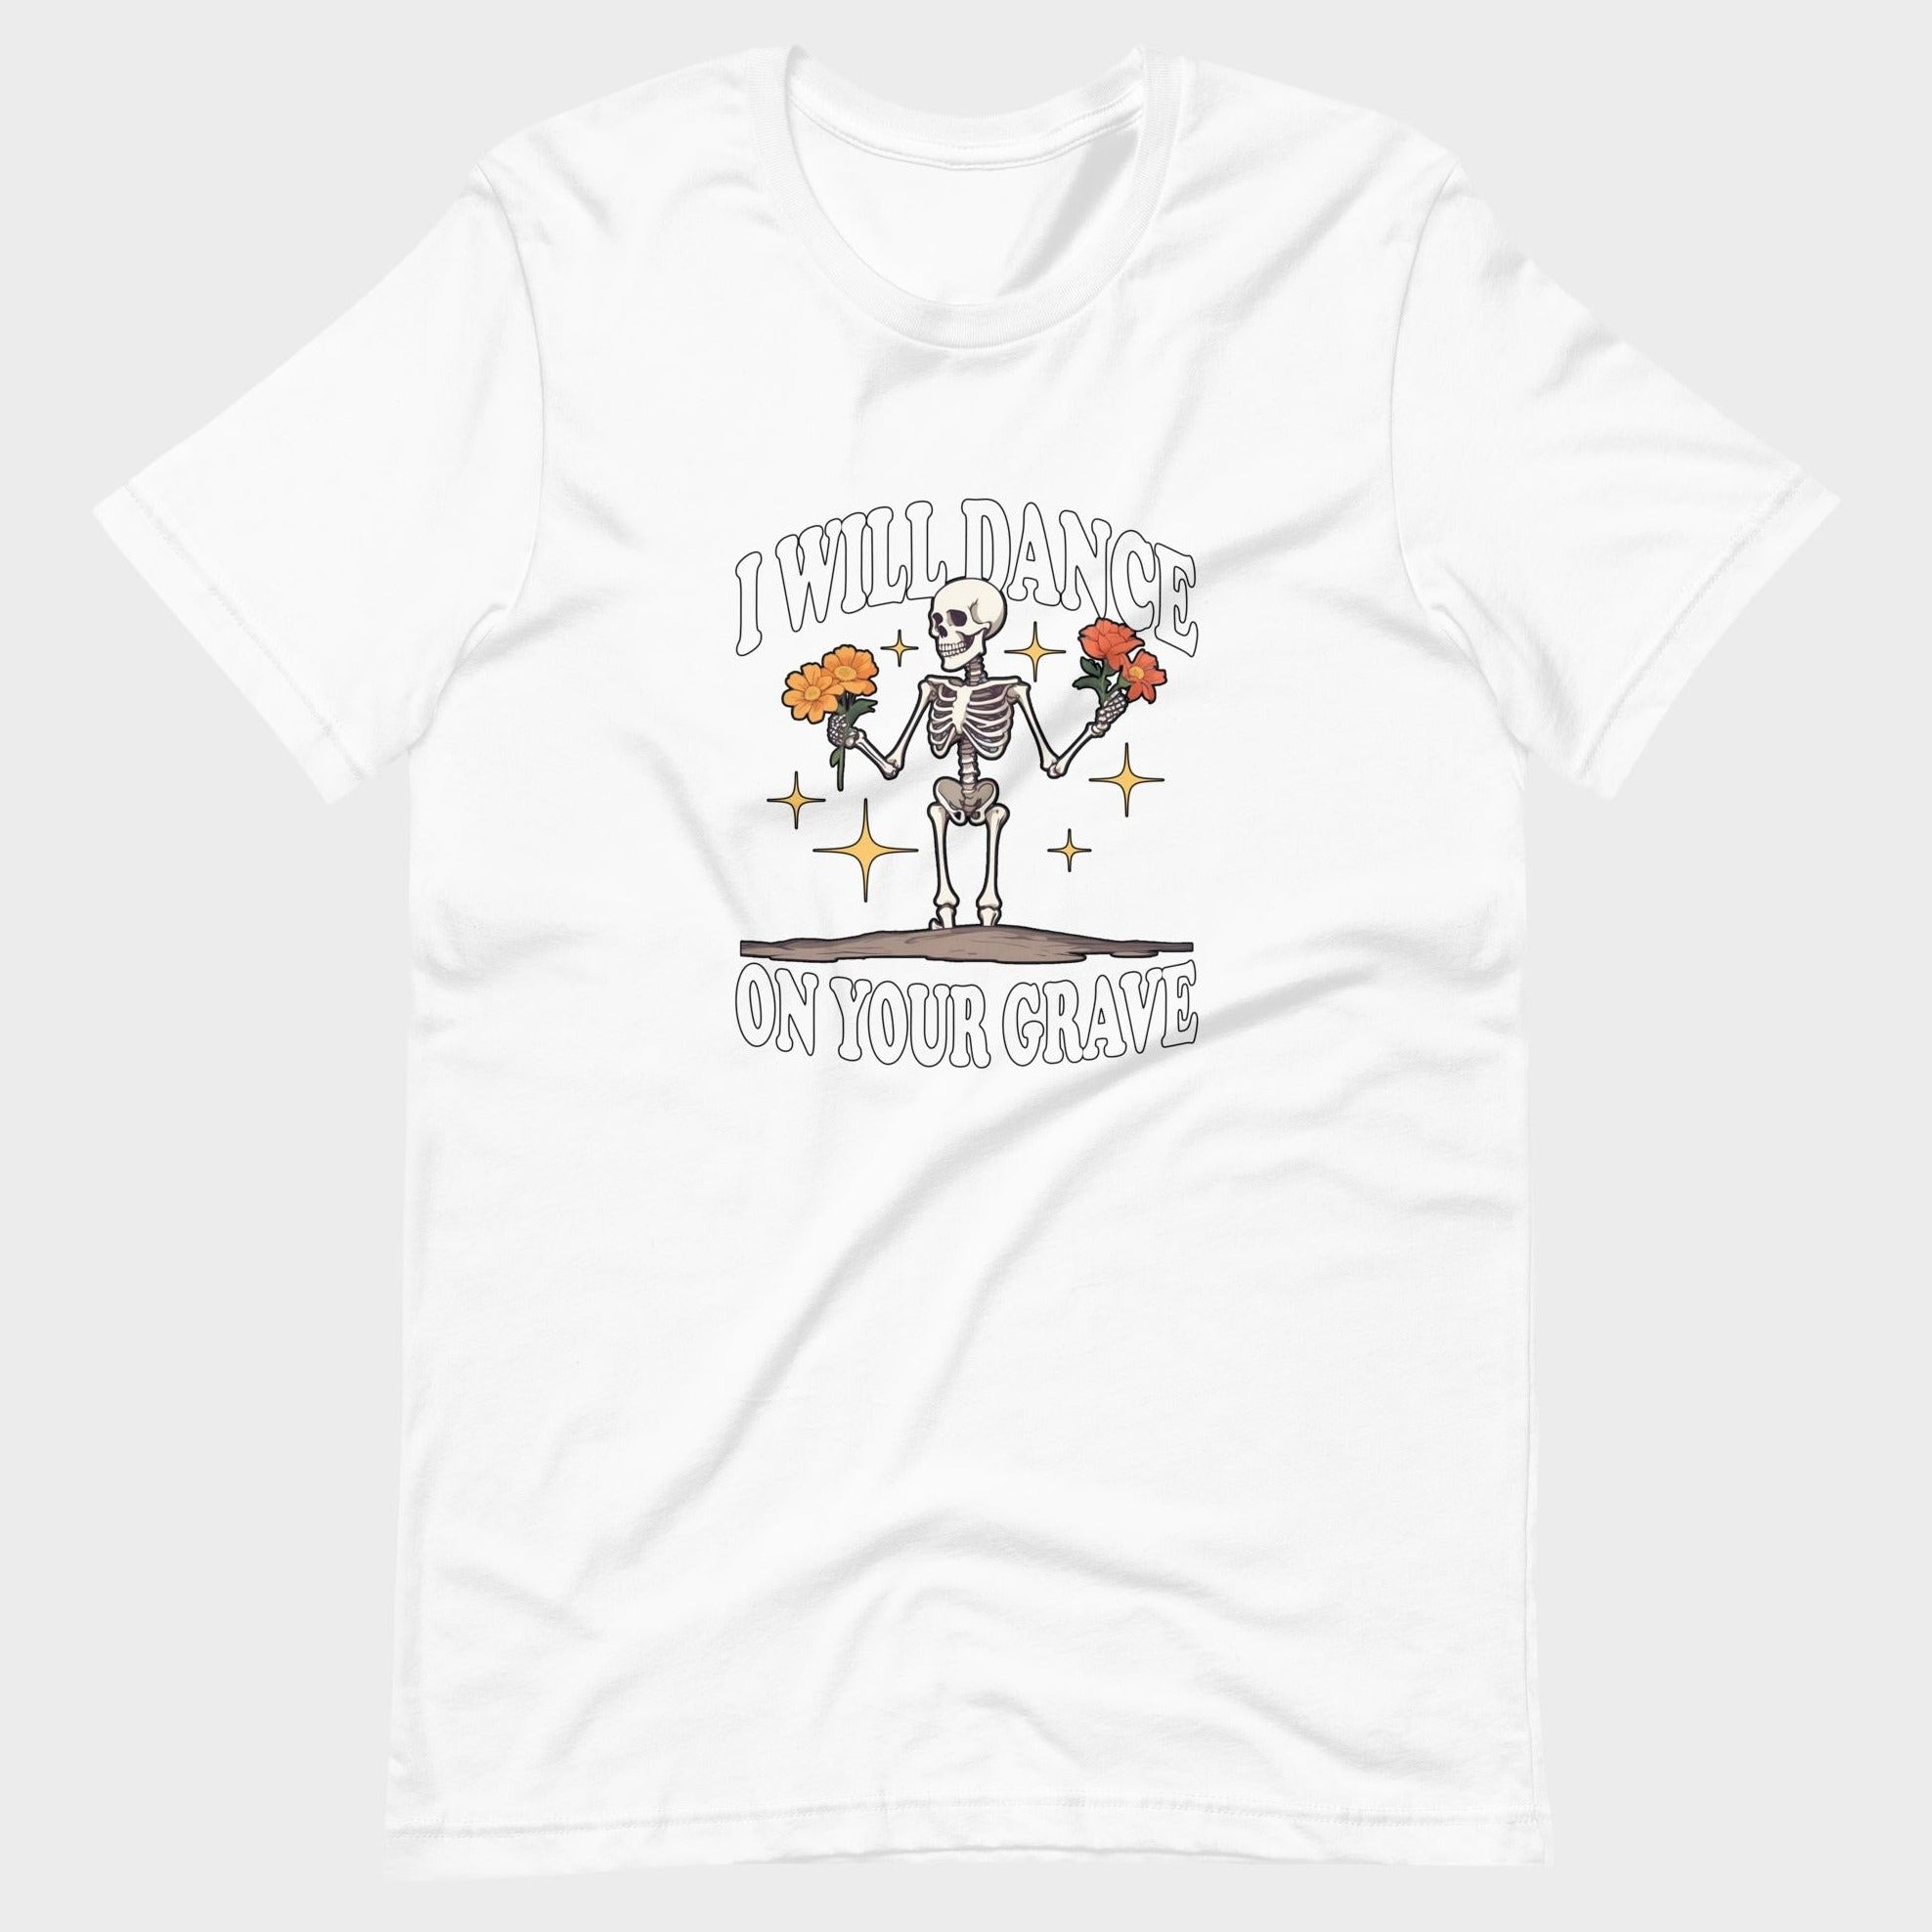 I Will Dance On Your Grave - T-Shirt